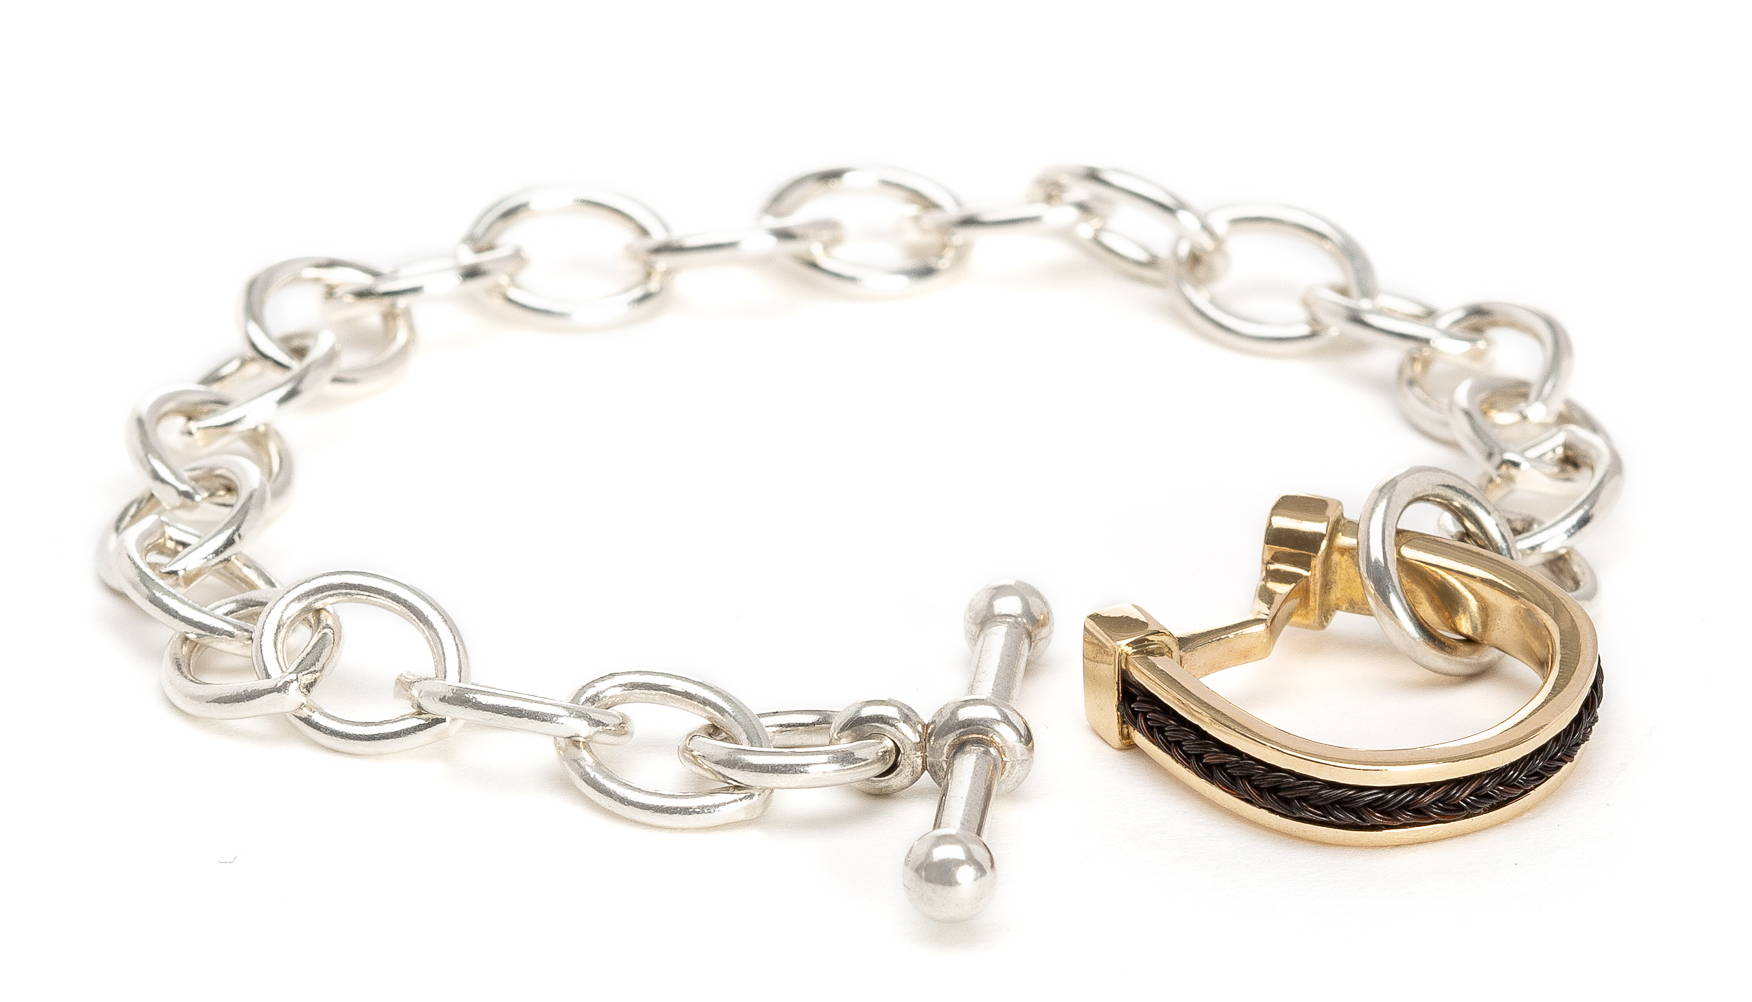 Sterling bracelet with gold horseshoe toggle.  Inset horsehair braid.